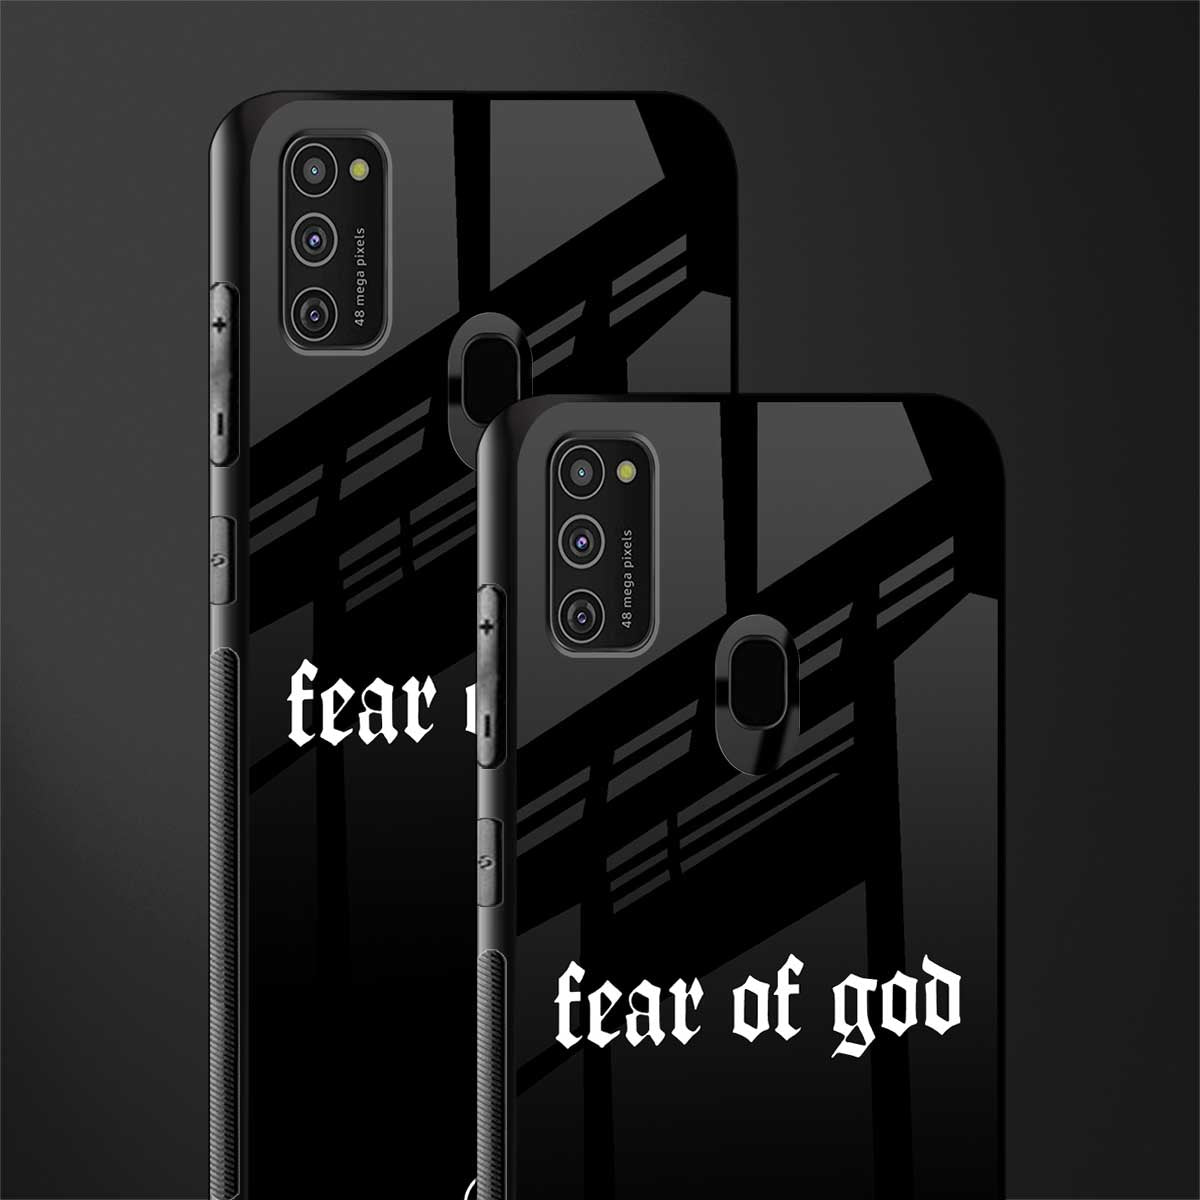 fear of god phone cover for samsung galaxy m21